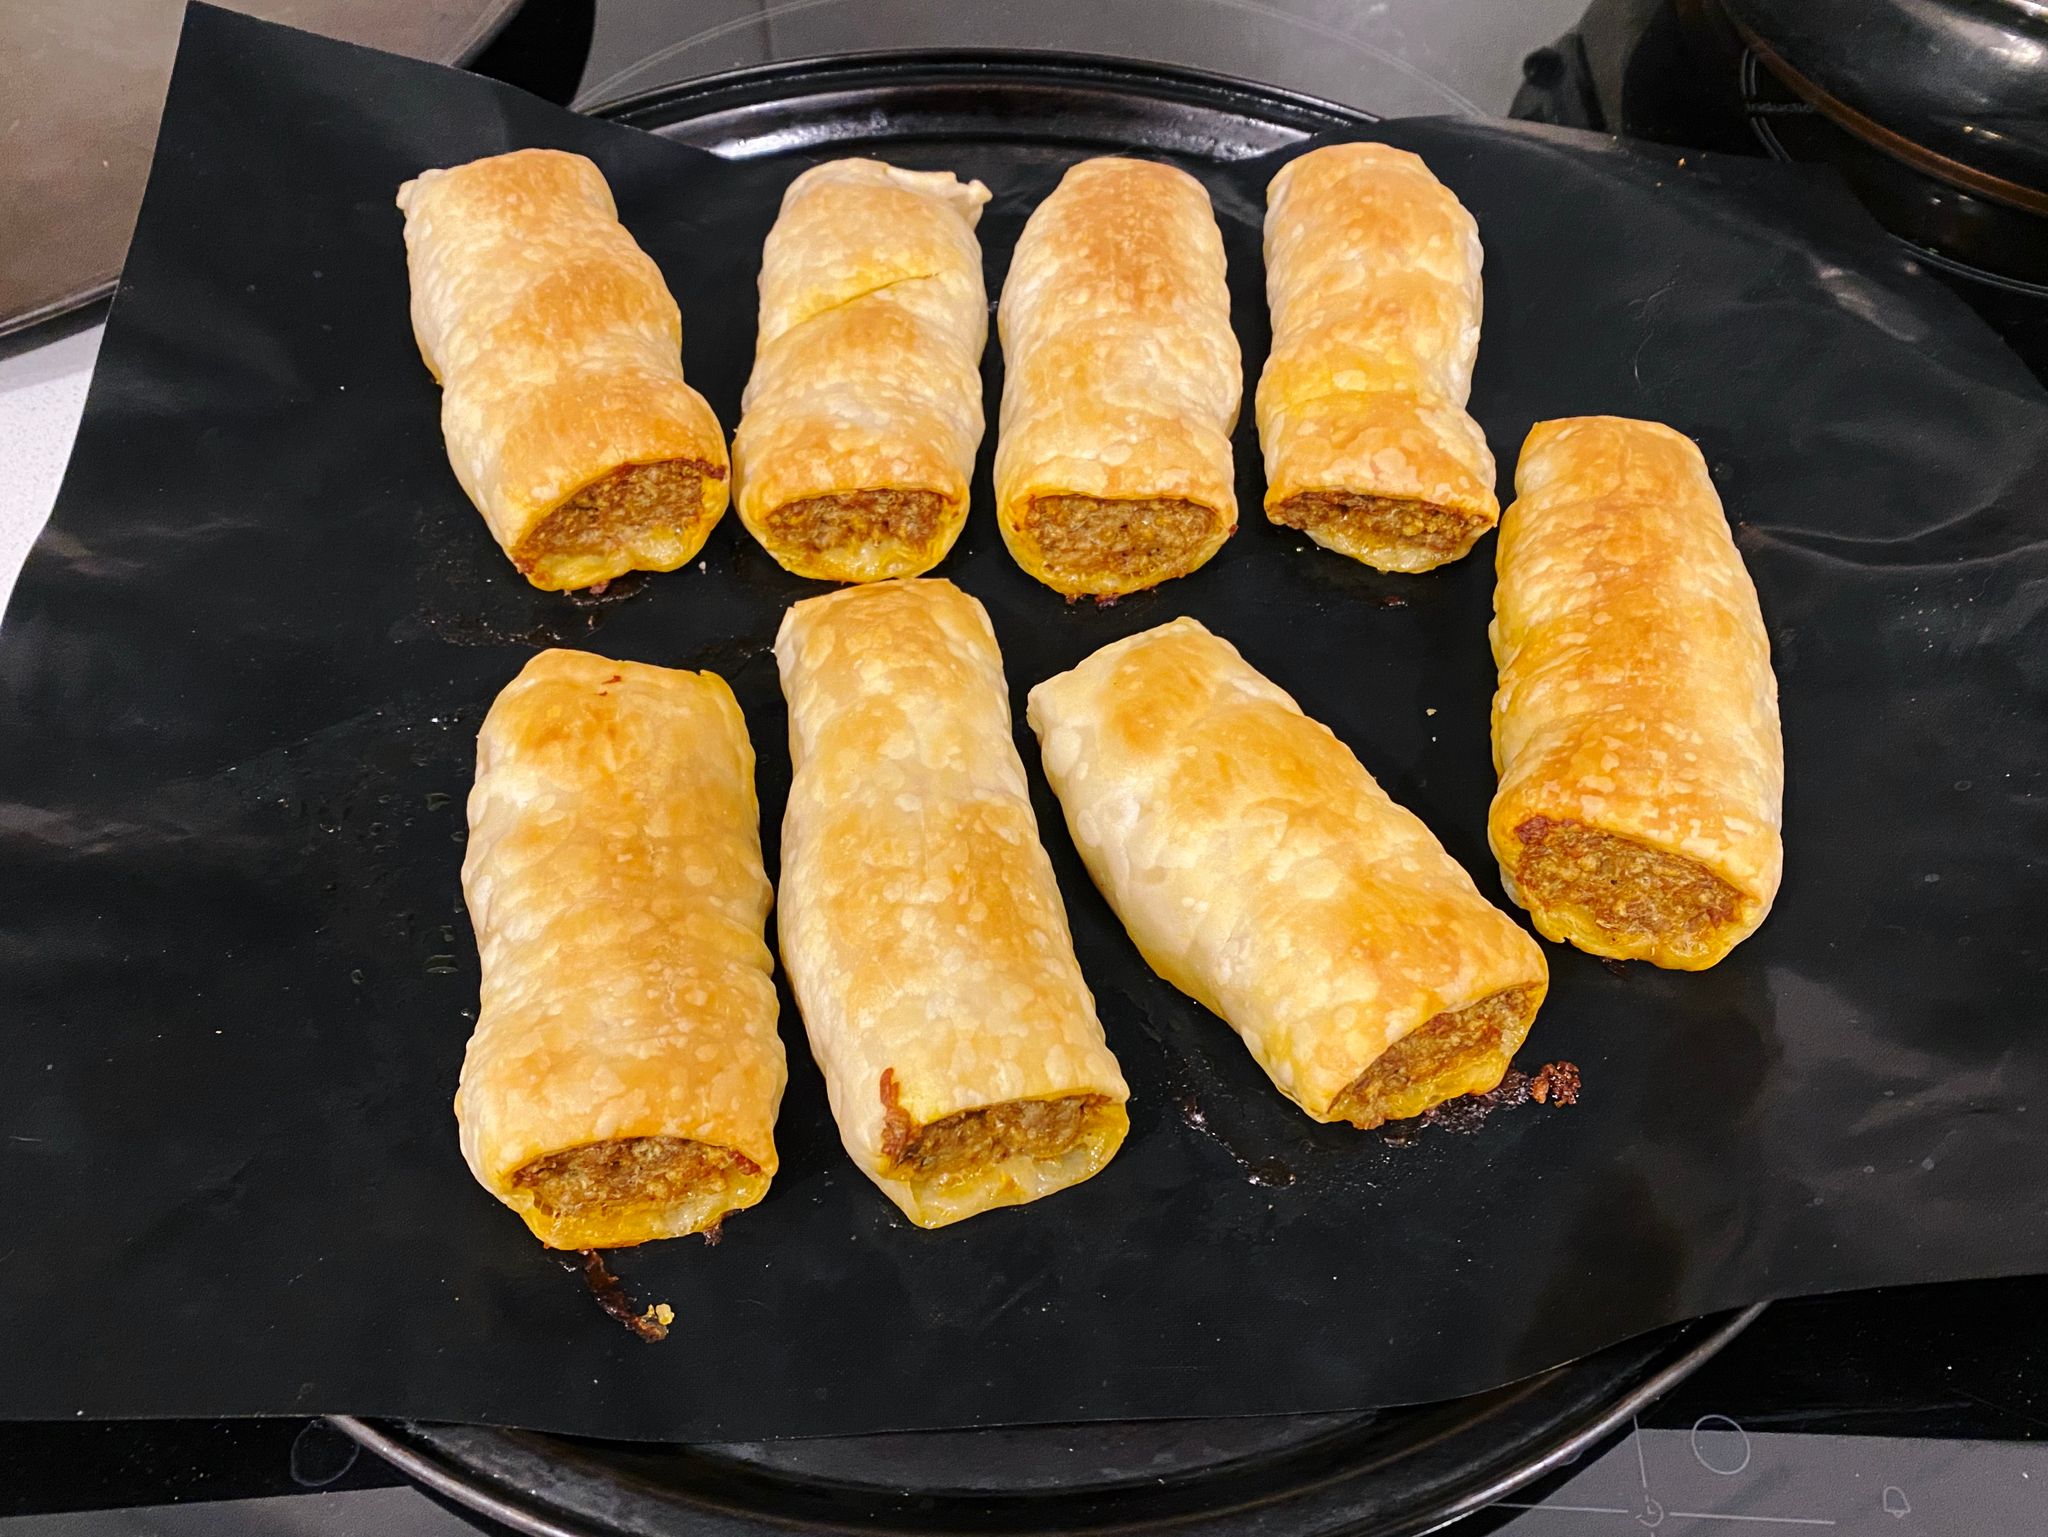 A photo of eight sausage rolls sitting an oven tray, fresh out of the oven.